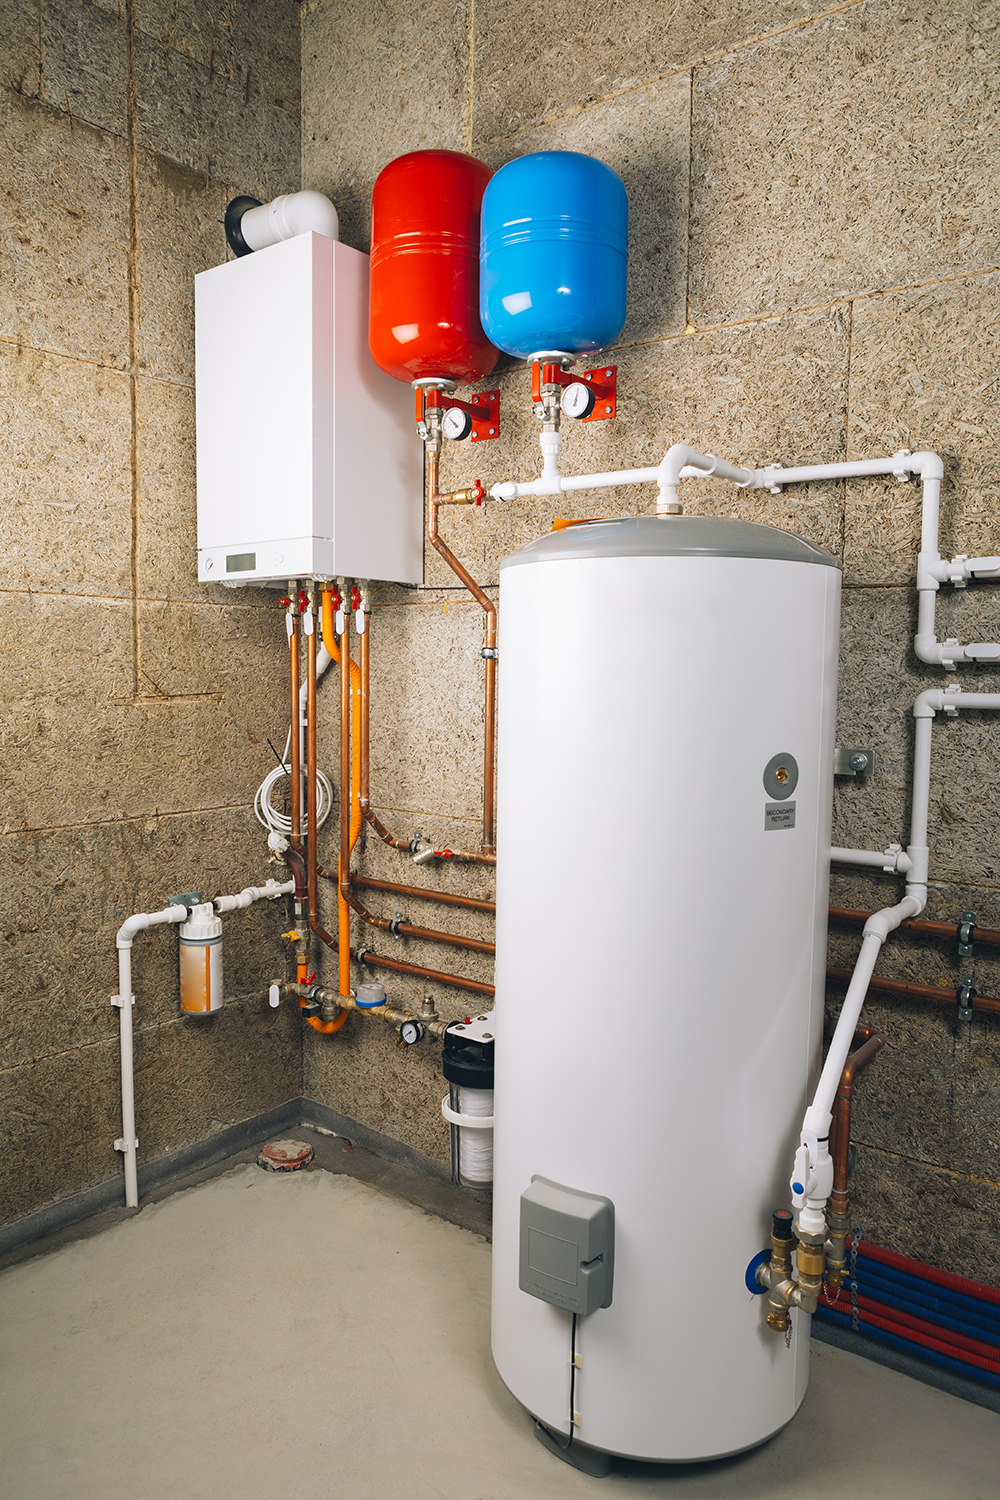 How to change an expansion tank on a water heater A Water Heater Expansion Tank Guide For Homeowners